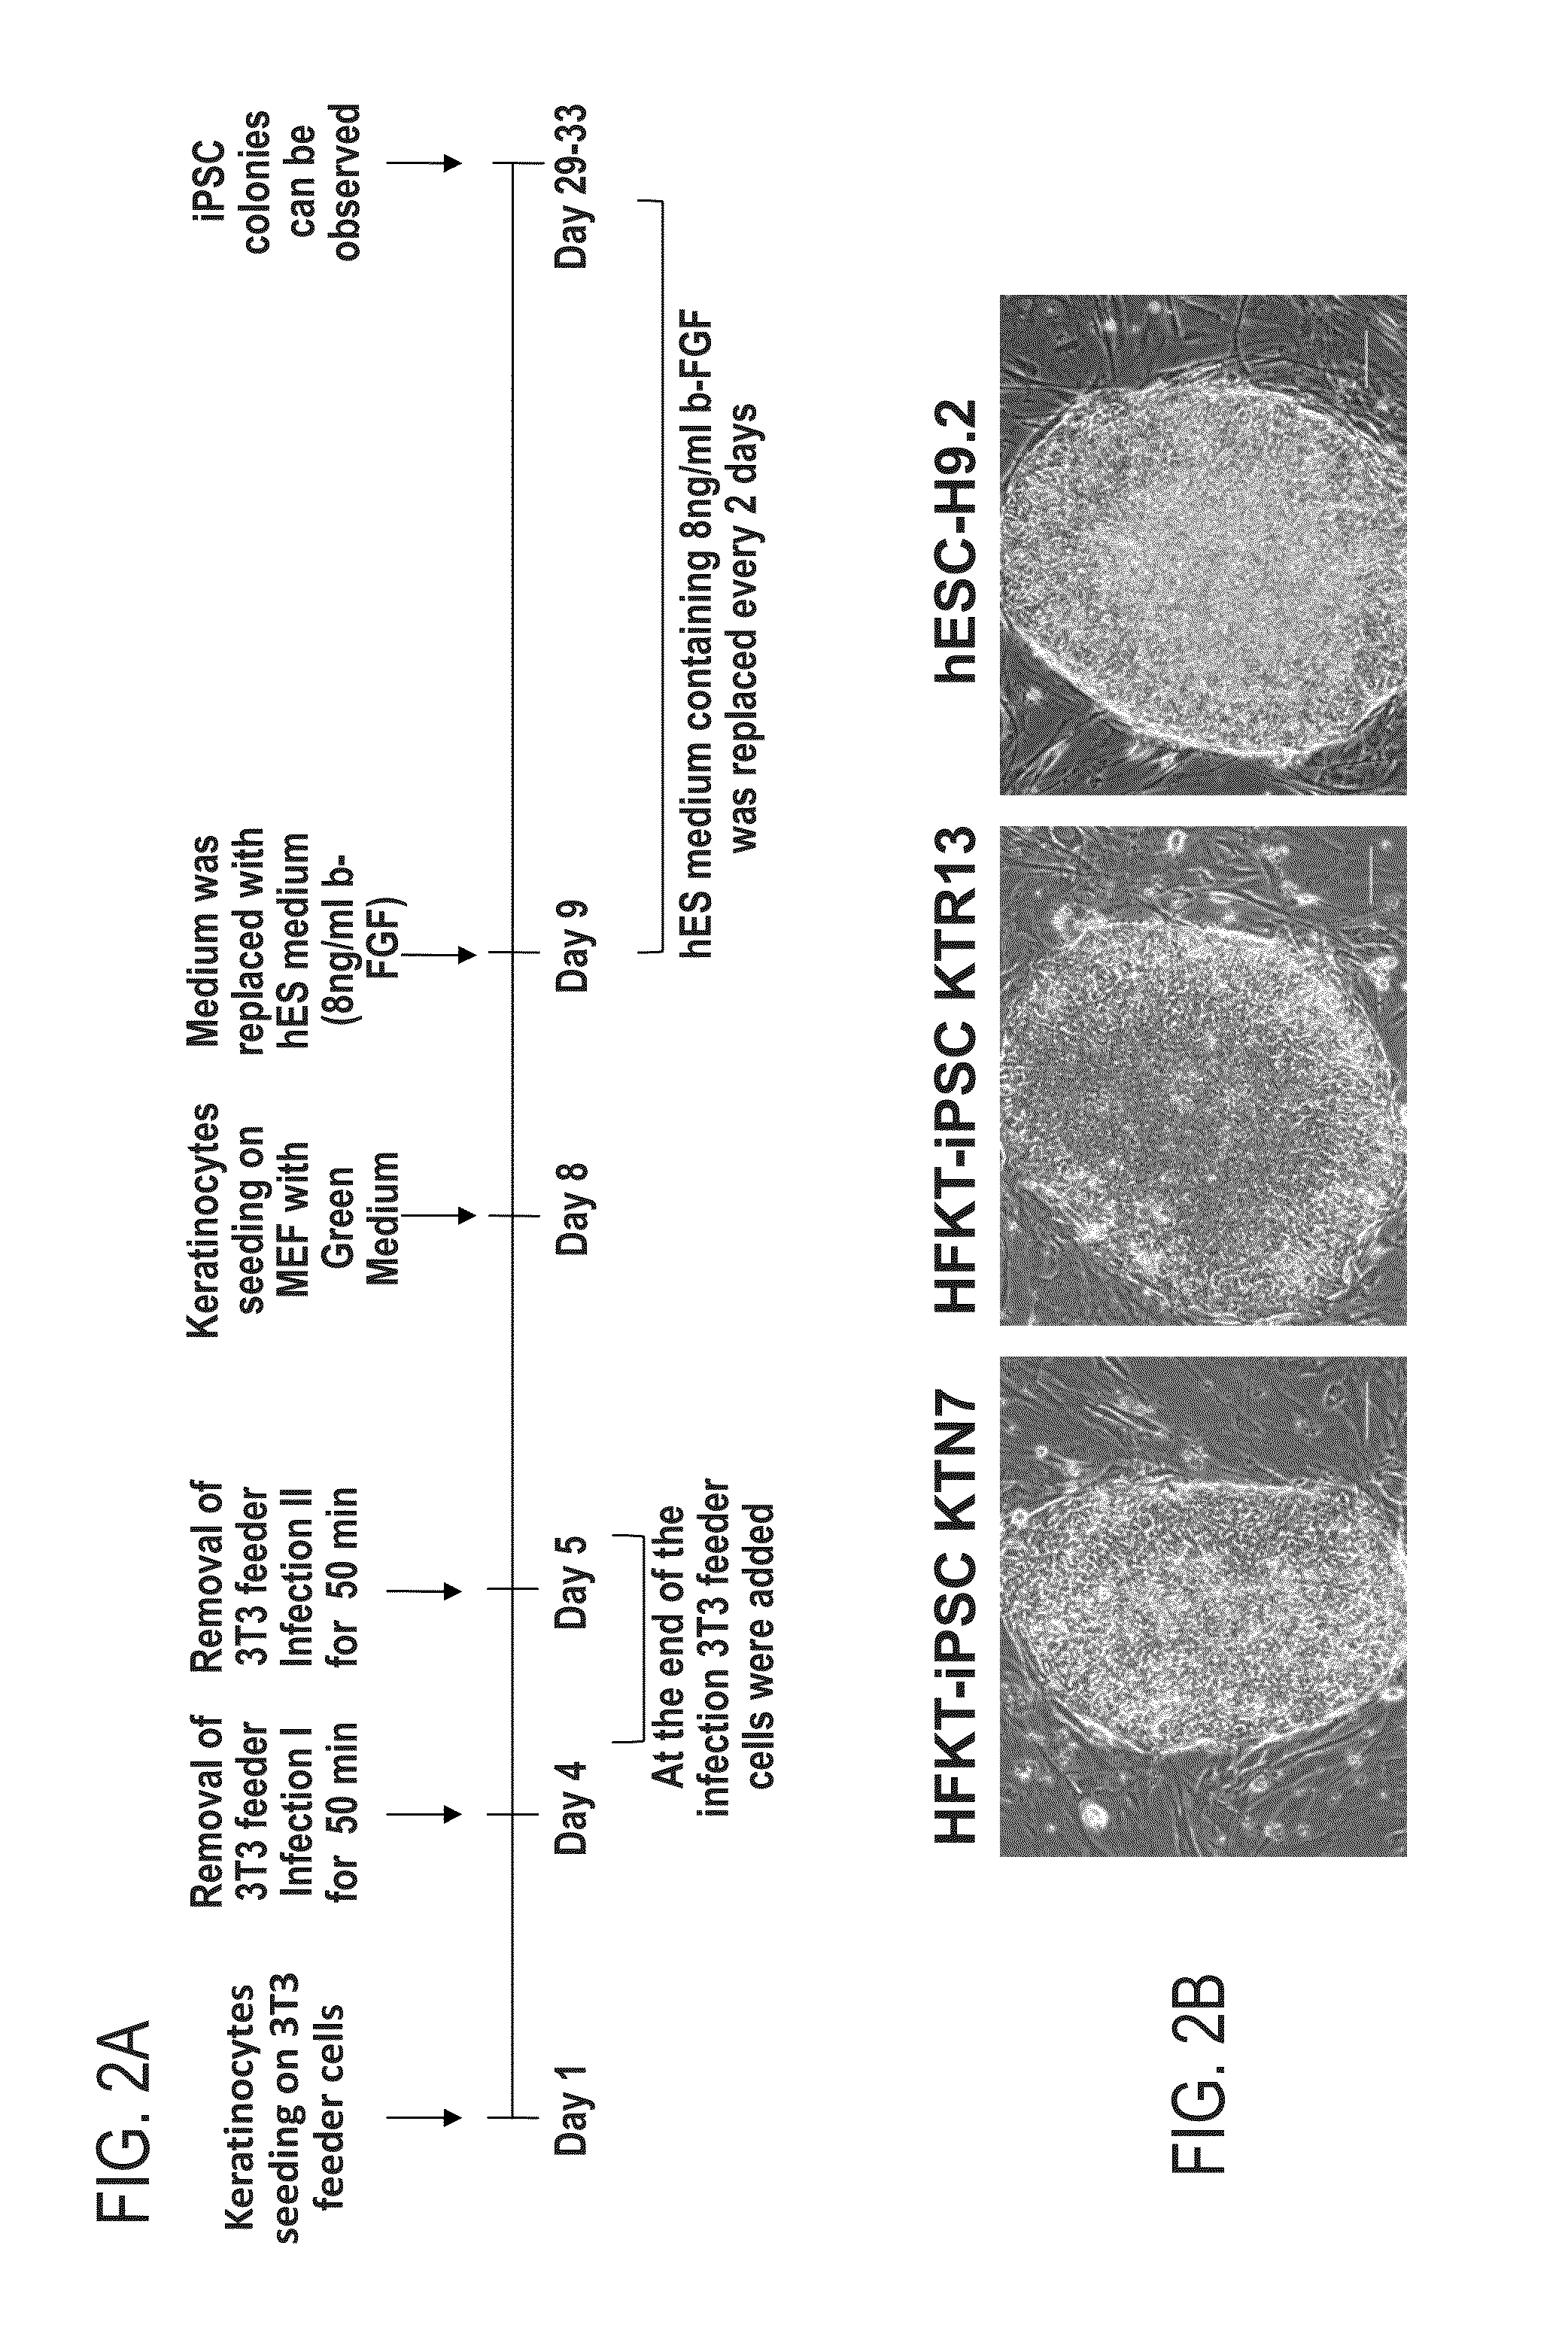 Method for generating induced pluripotent stem cells from keratinocytes derived from plucked hair follicles